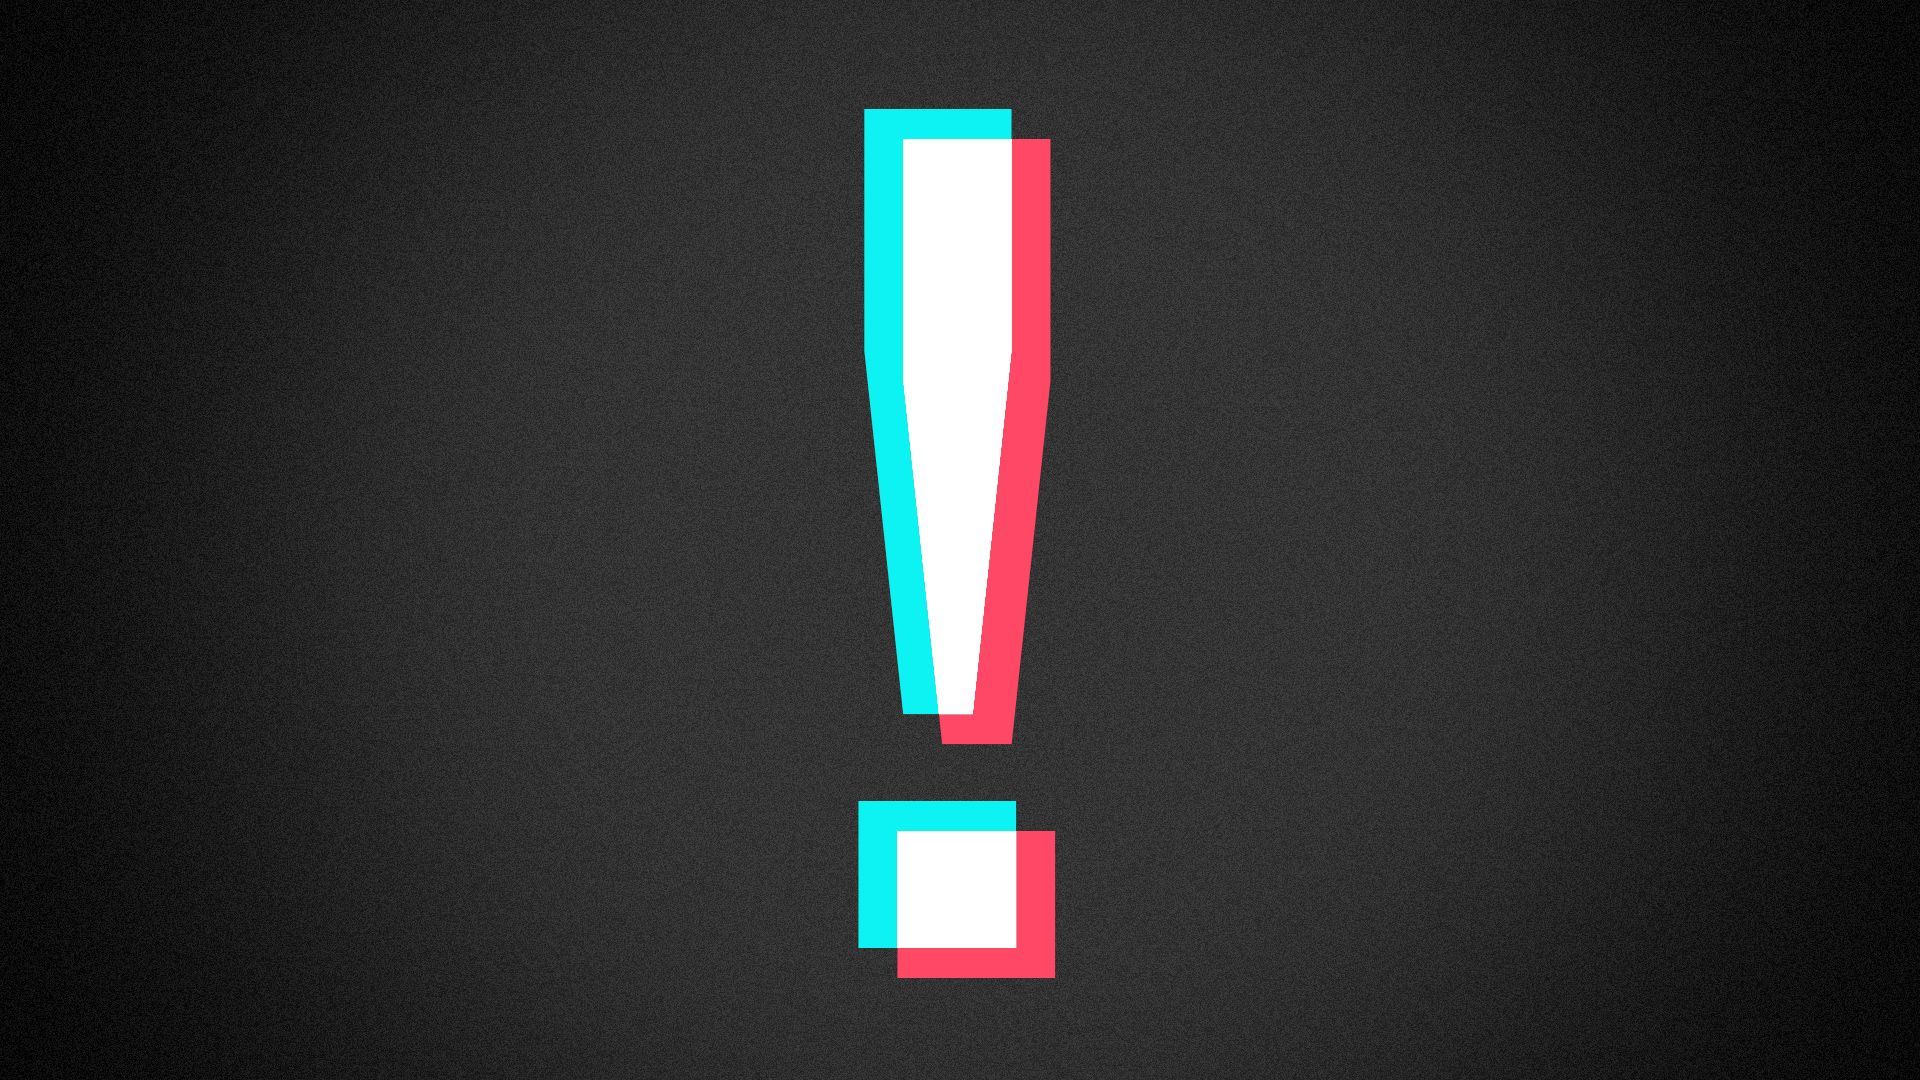 Illustration of an exclamation point in the style of the TikTok logo. 